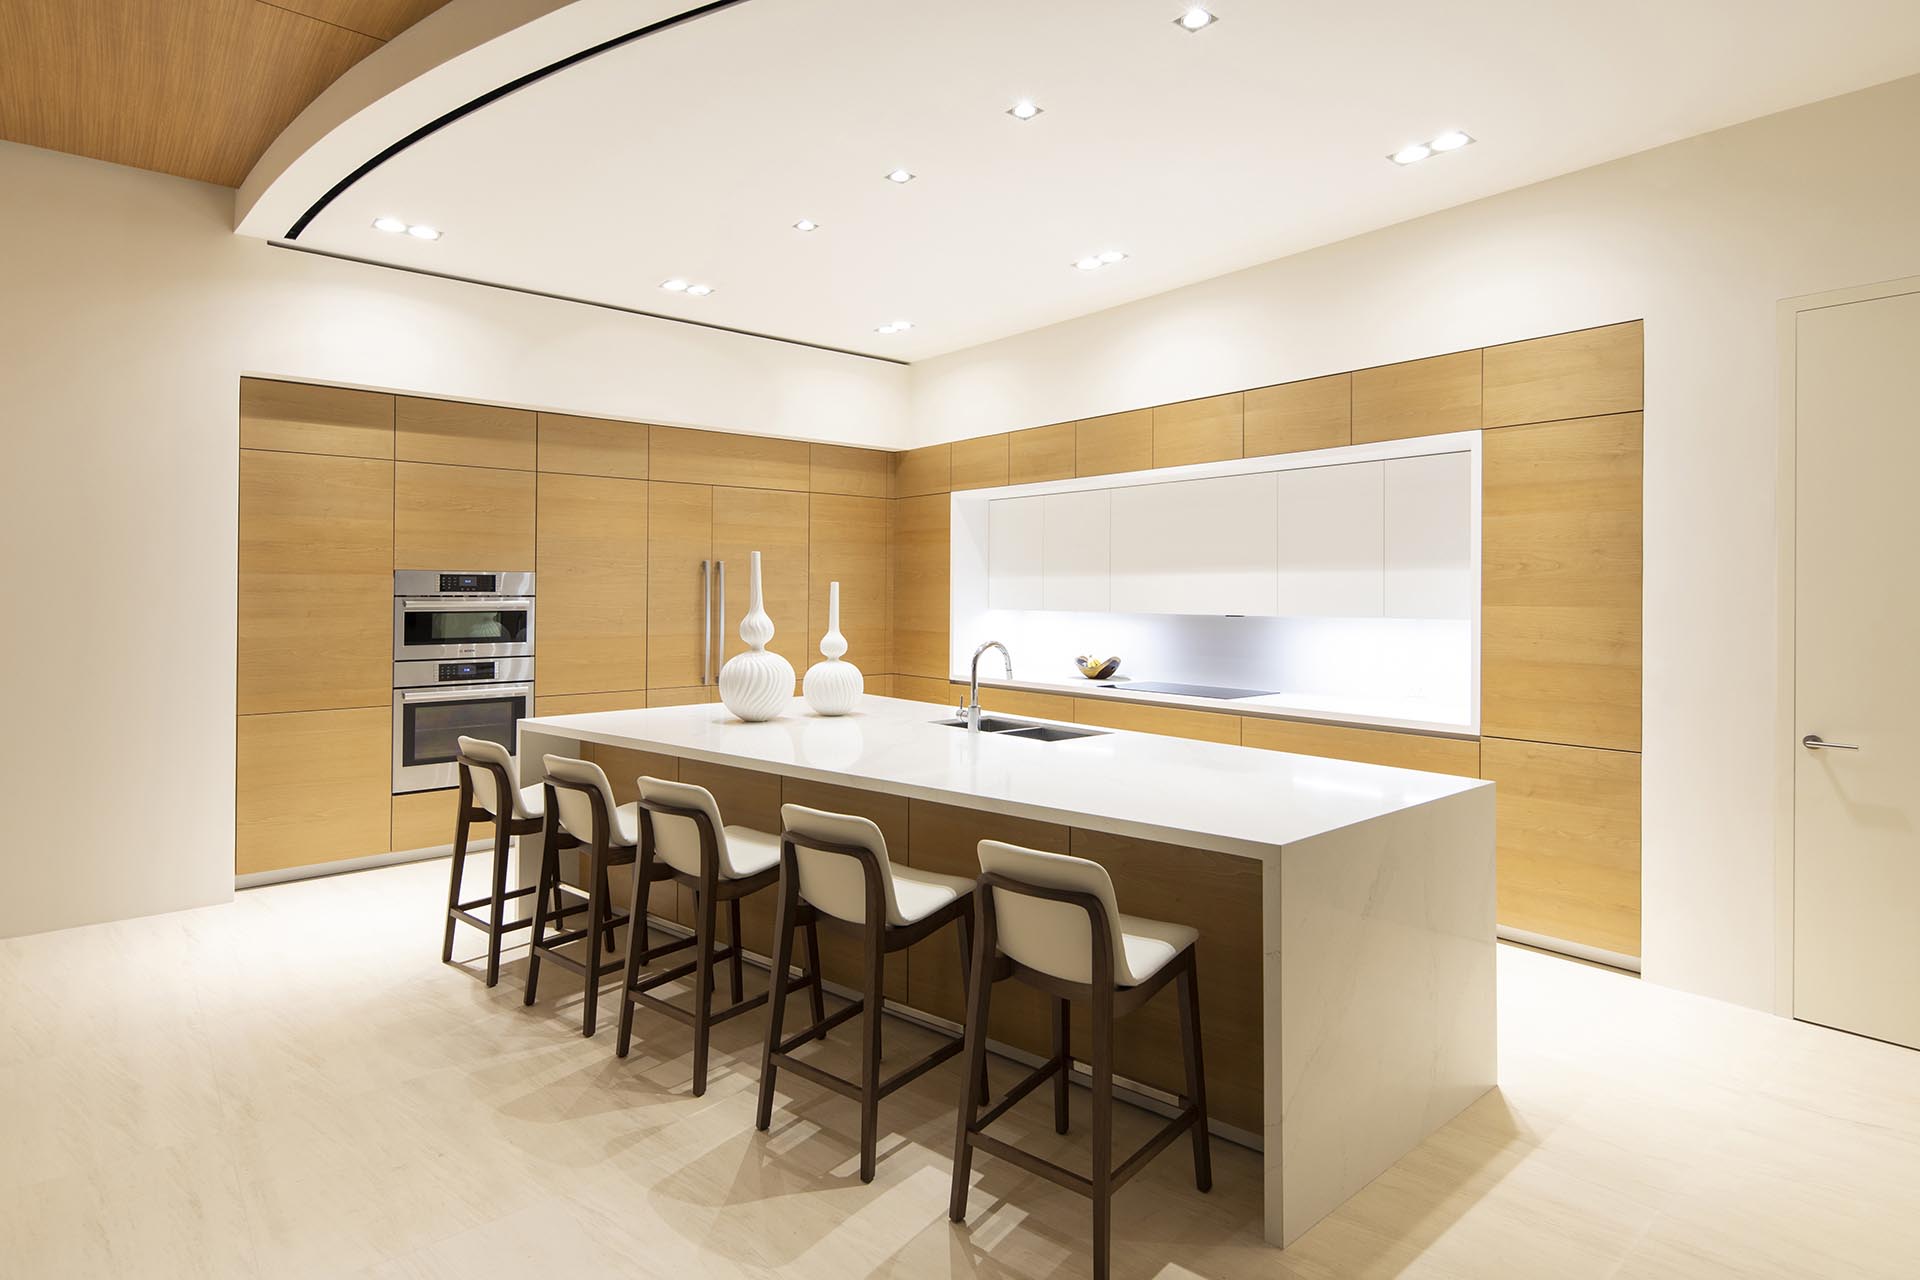 Santos Kitchens: designed to suit any home